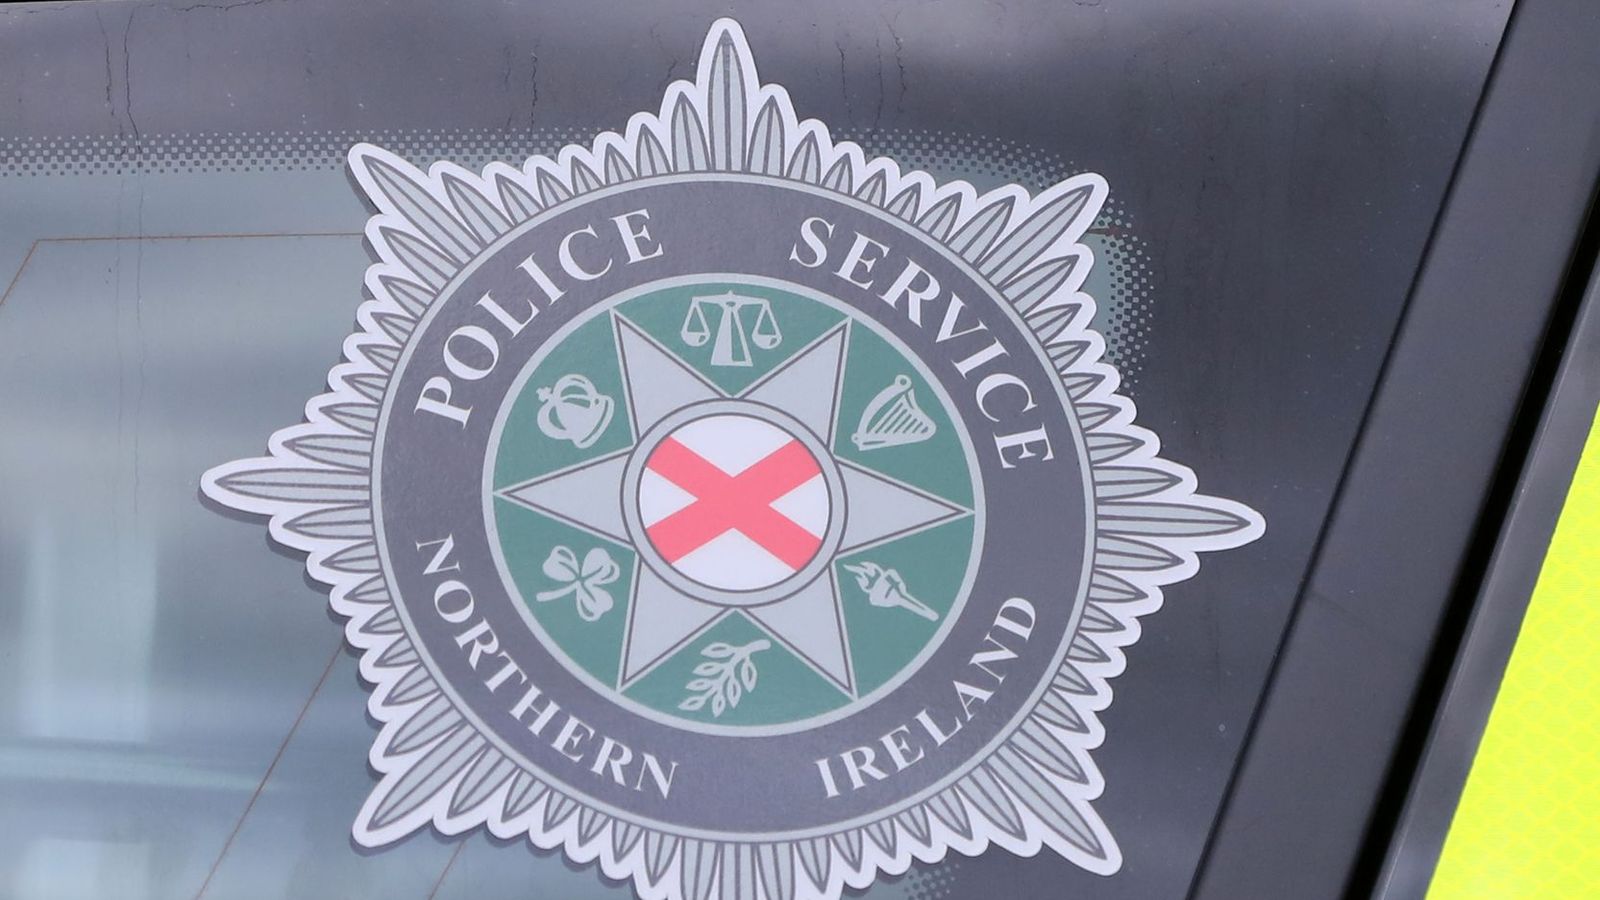 Armagh: Four people killed in single-vehicle crash, police say